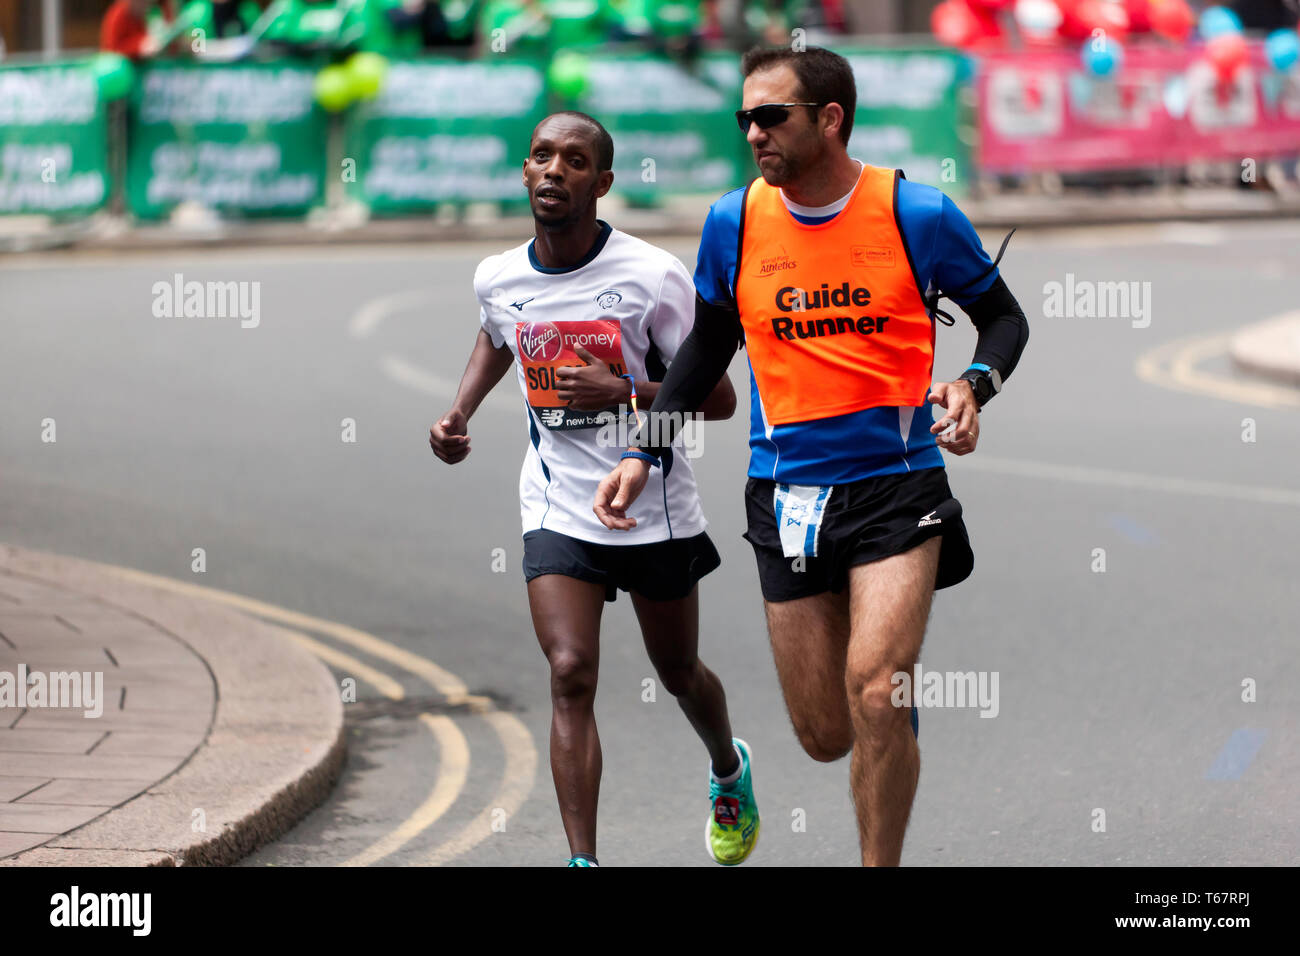 Avi Adhanany Solomon with his guide runner,  competing for Israel,  in the World Para Athletic Championships, part of the 2019 London Marathon. He finished 16th, in the T11/12 category Stock Photo